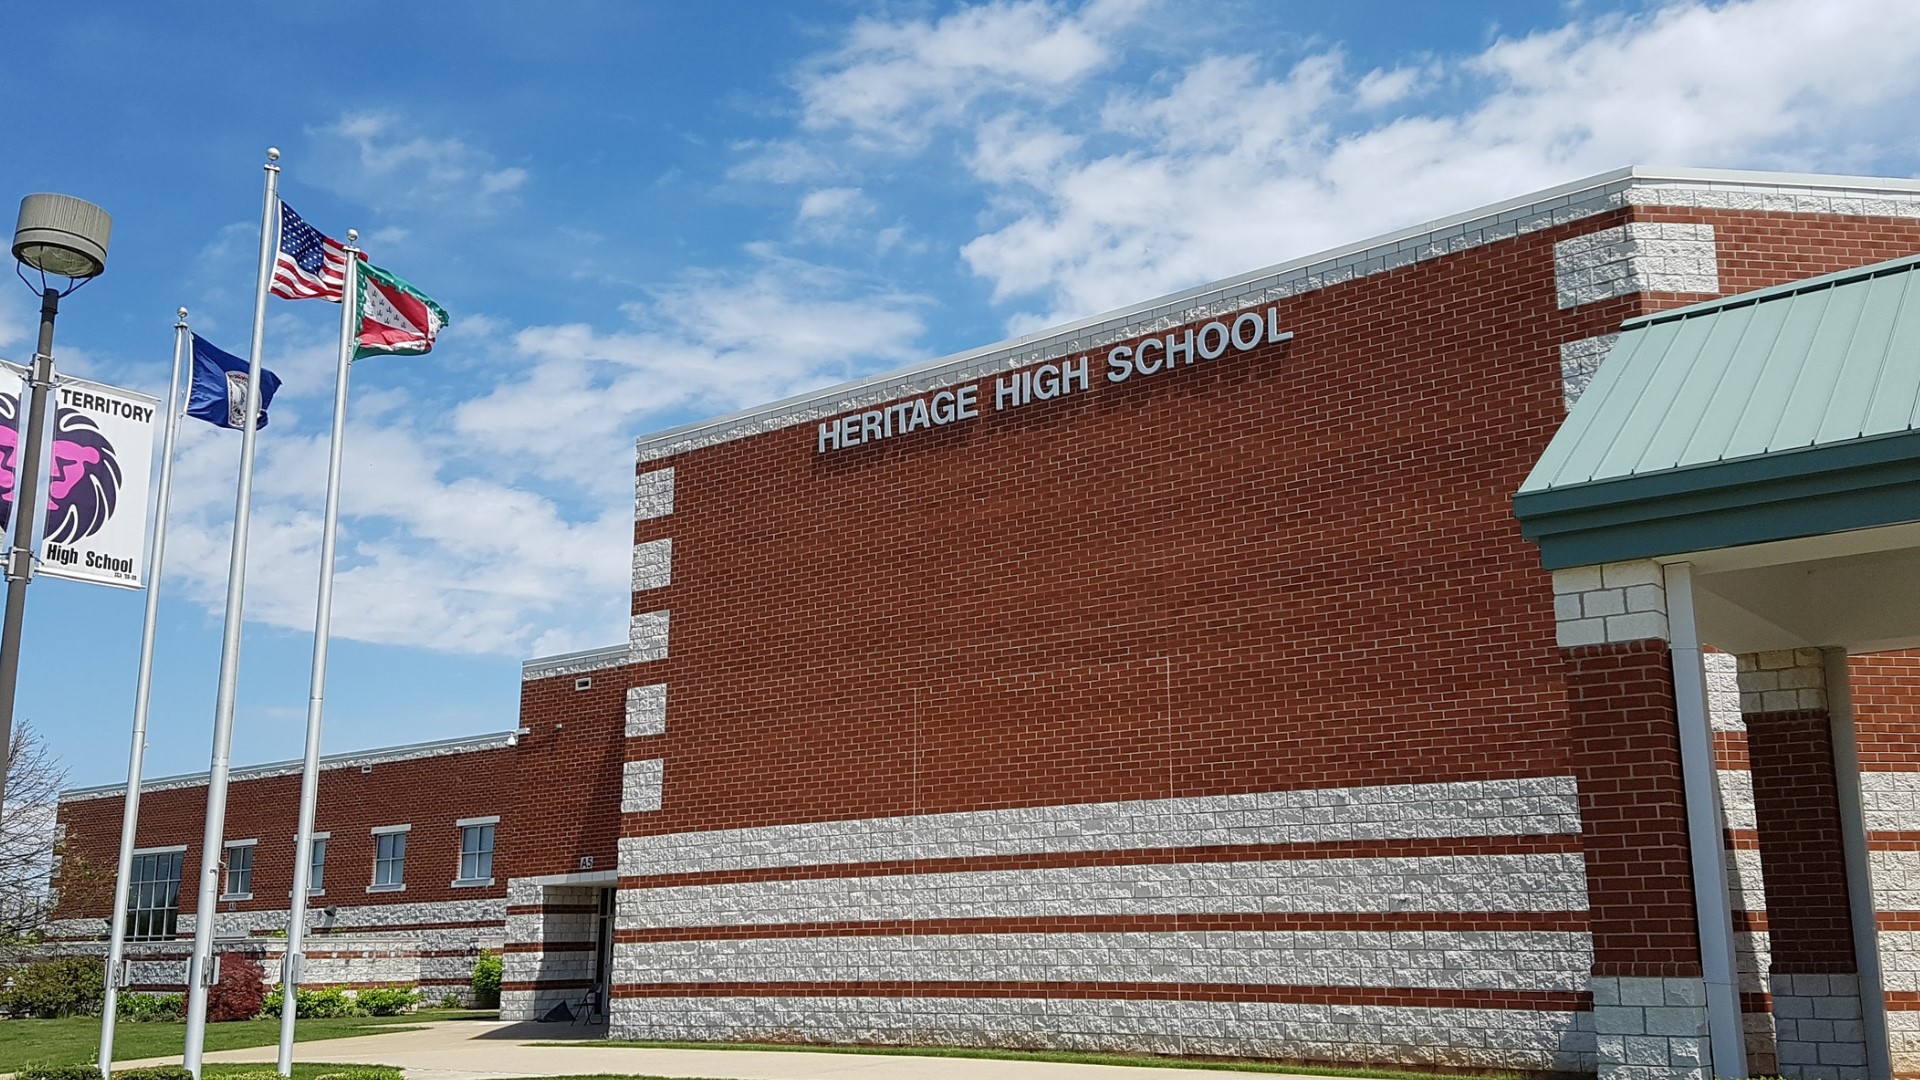 Police are investigating after racist graffiti was found in three bathrooms at Heritage High School in Loudoun County, Virginia.